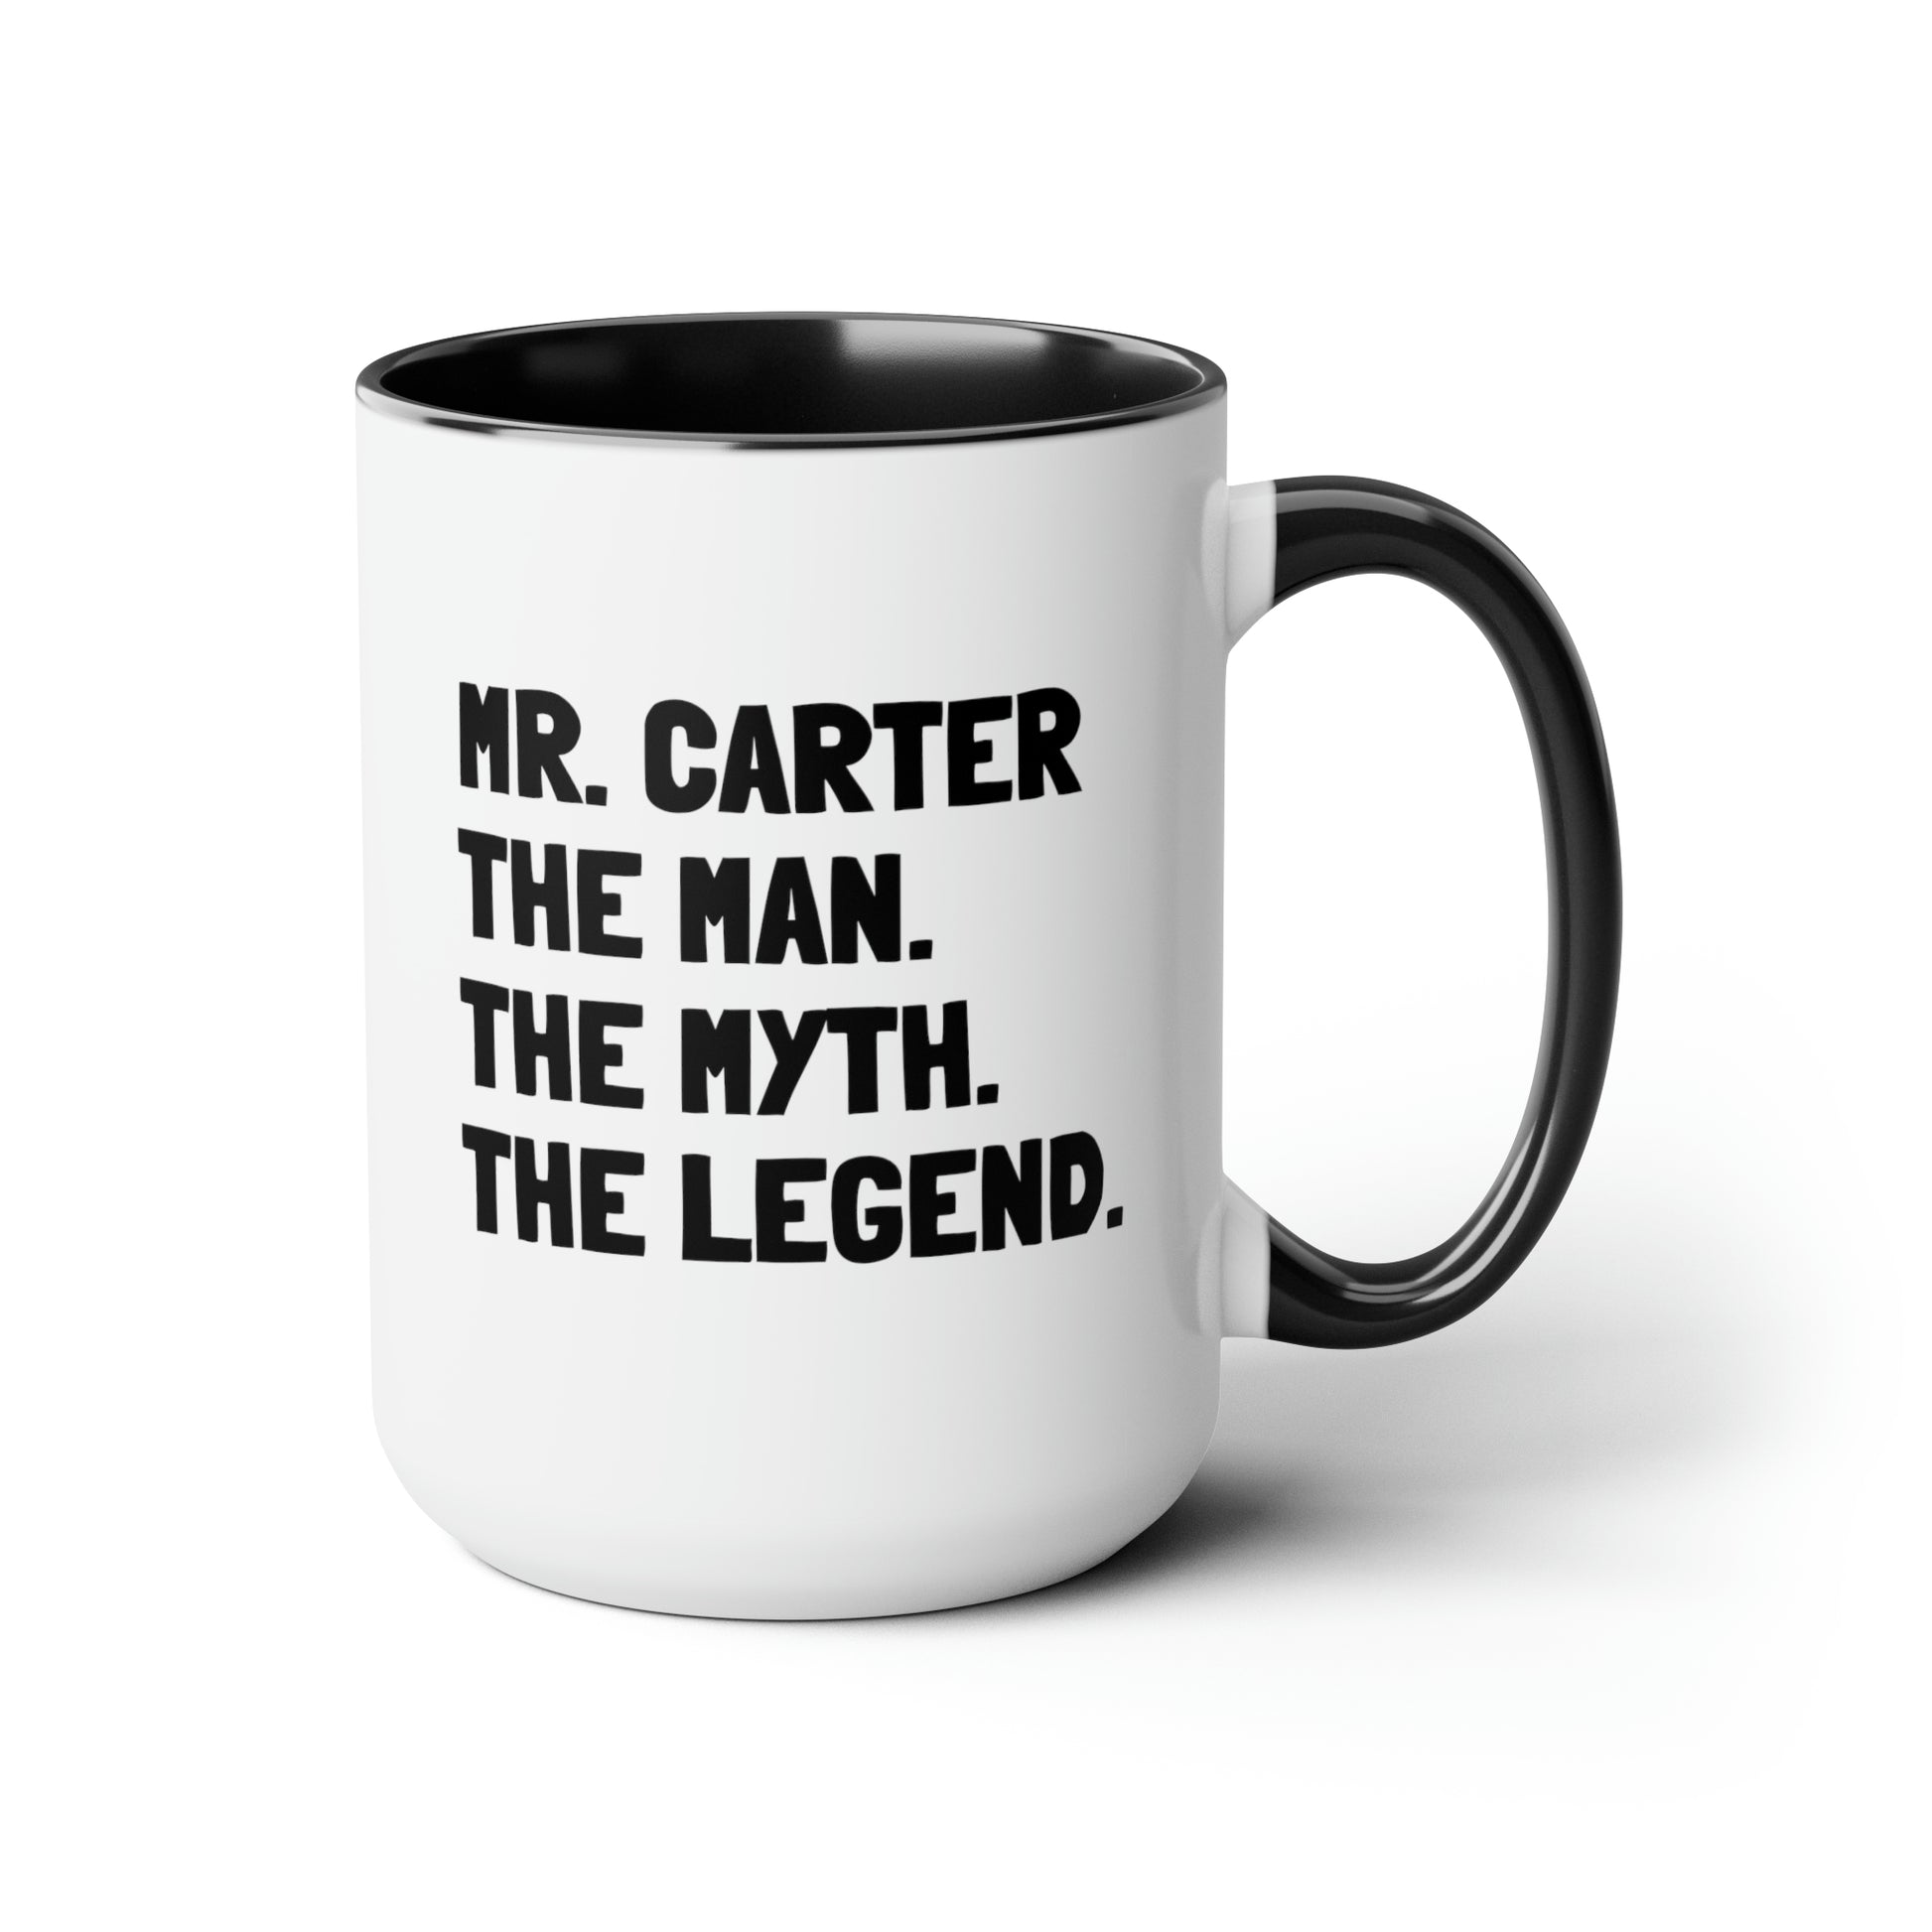 Mr. Carter The Man. The Myth. The Legend. 15oz white with black accent funny large coffee mug gift for male teacher end of year appreciation custom name waveywares wavey wares wavywares wavy wares